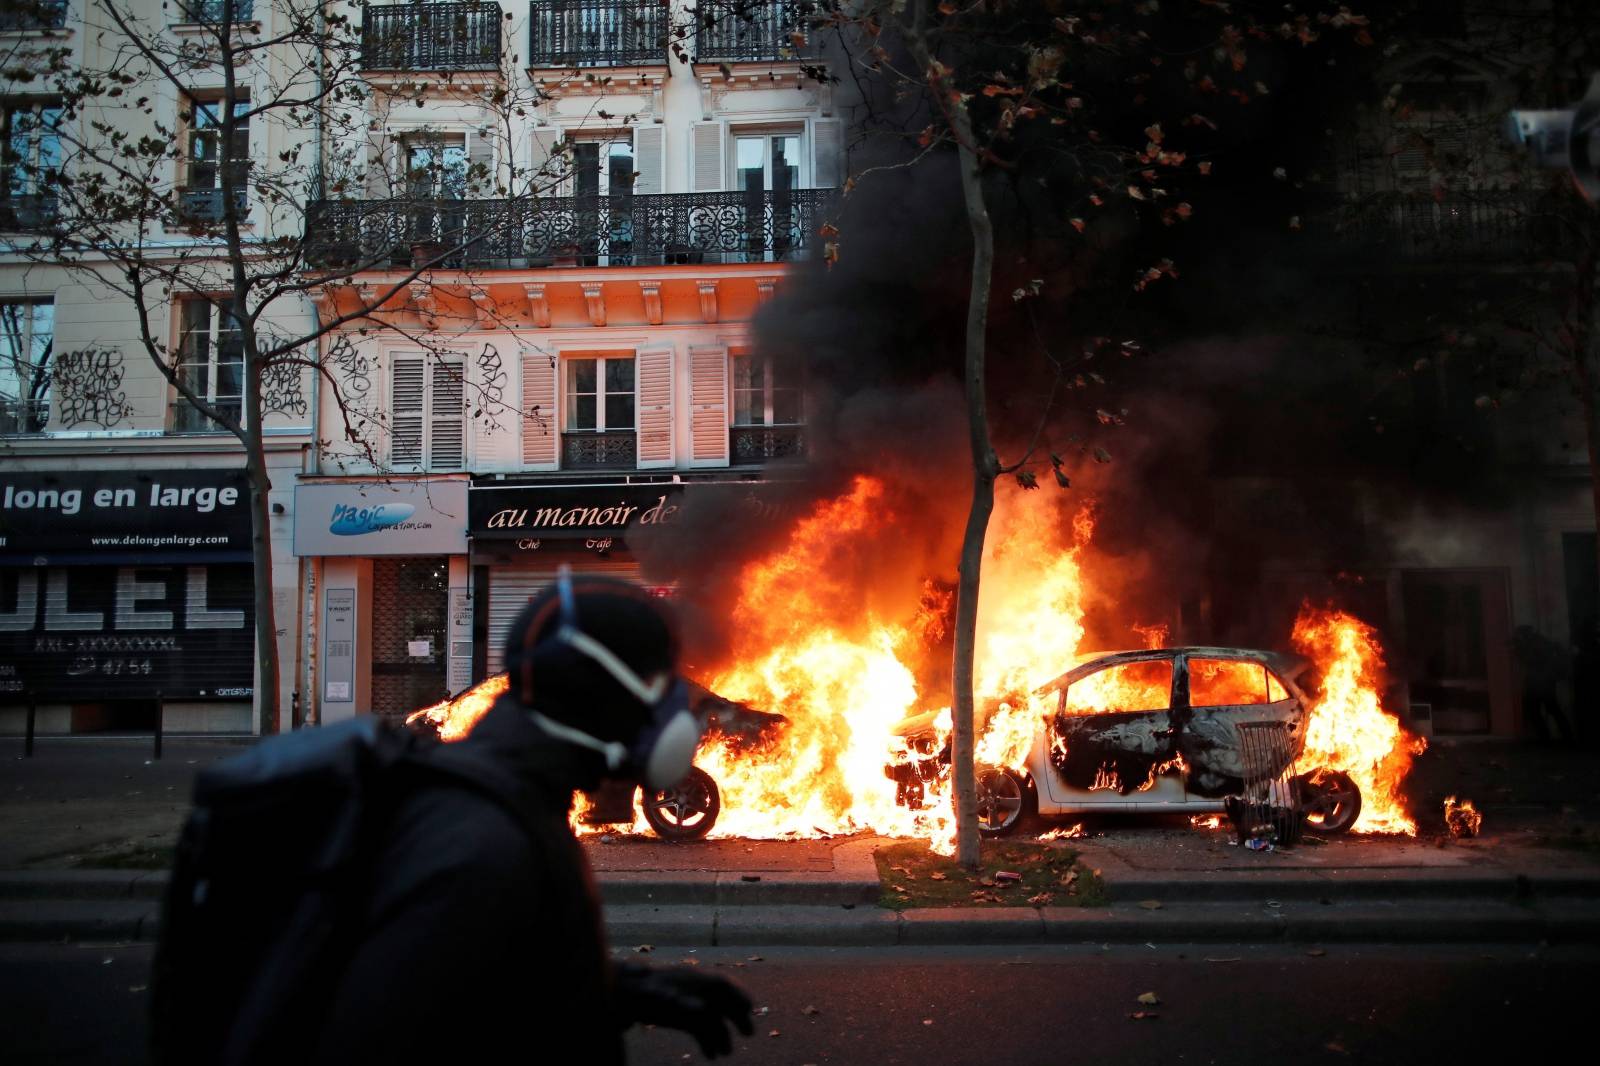 Protests over proposed curbs on identifying police, in Paris